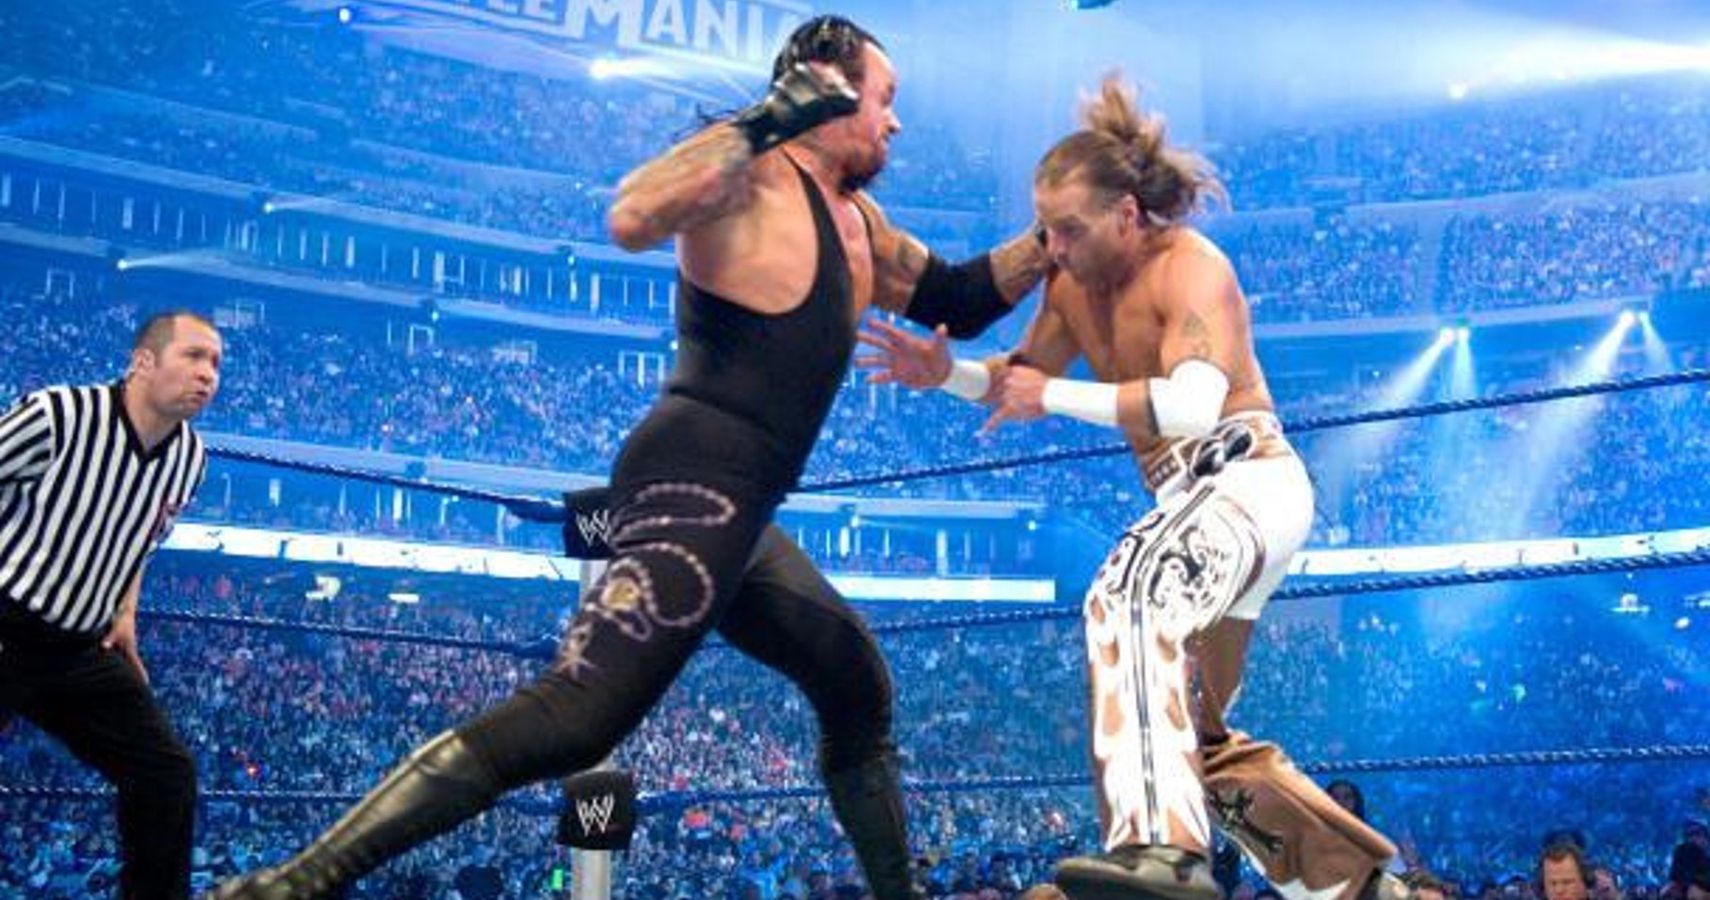 10 WWE Matches That Should've Received 5 Stars (But Didn't)